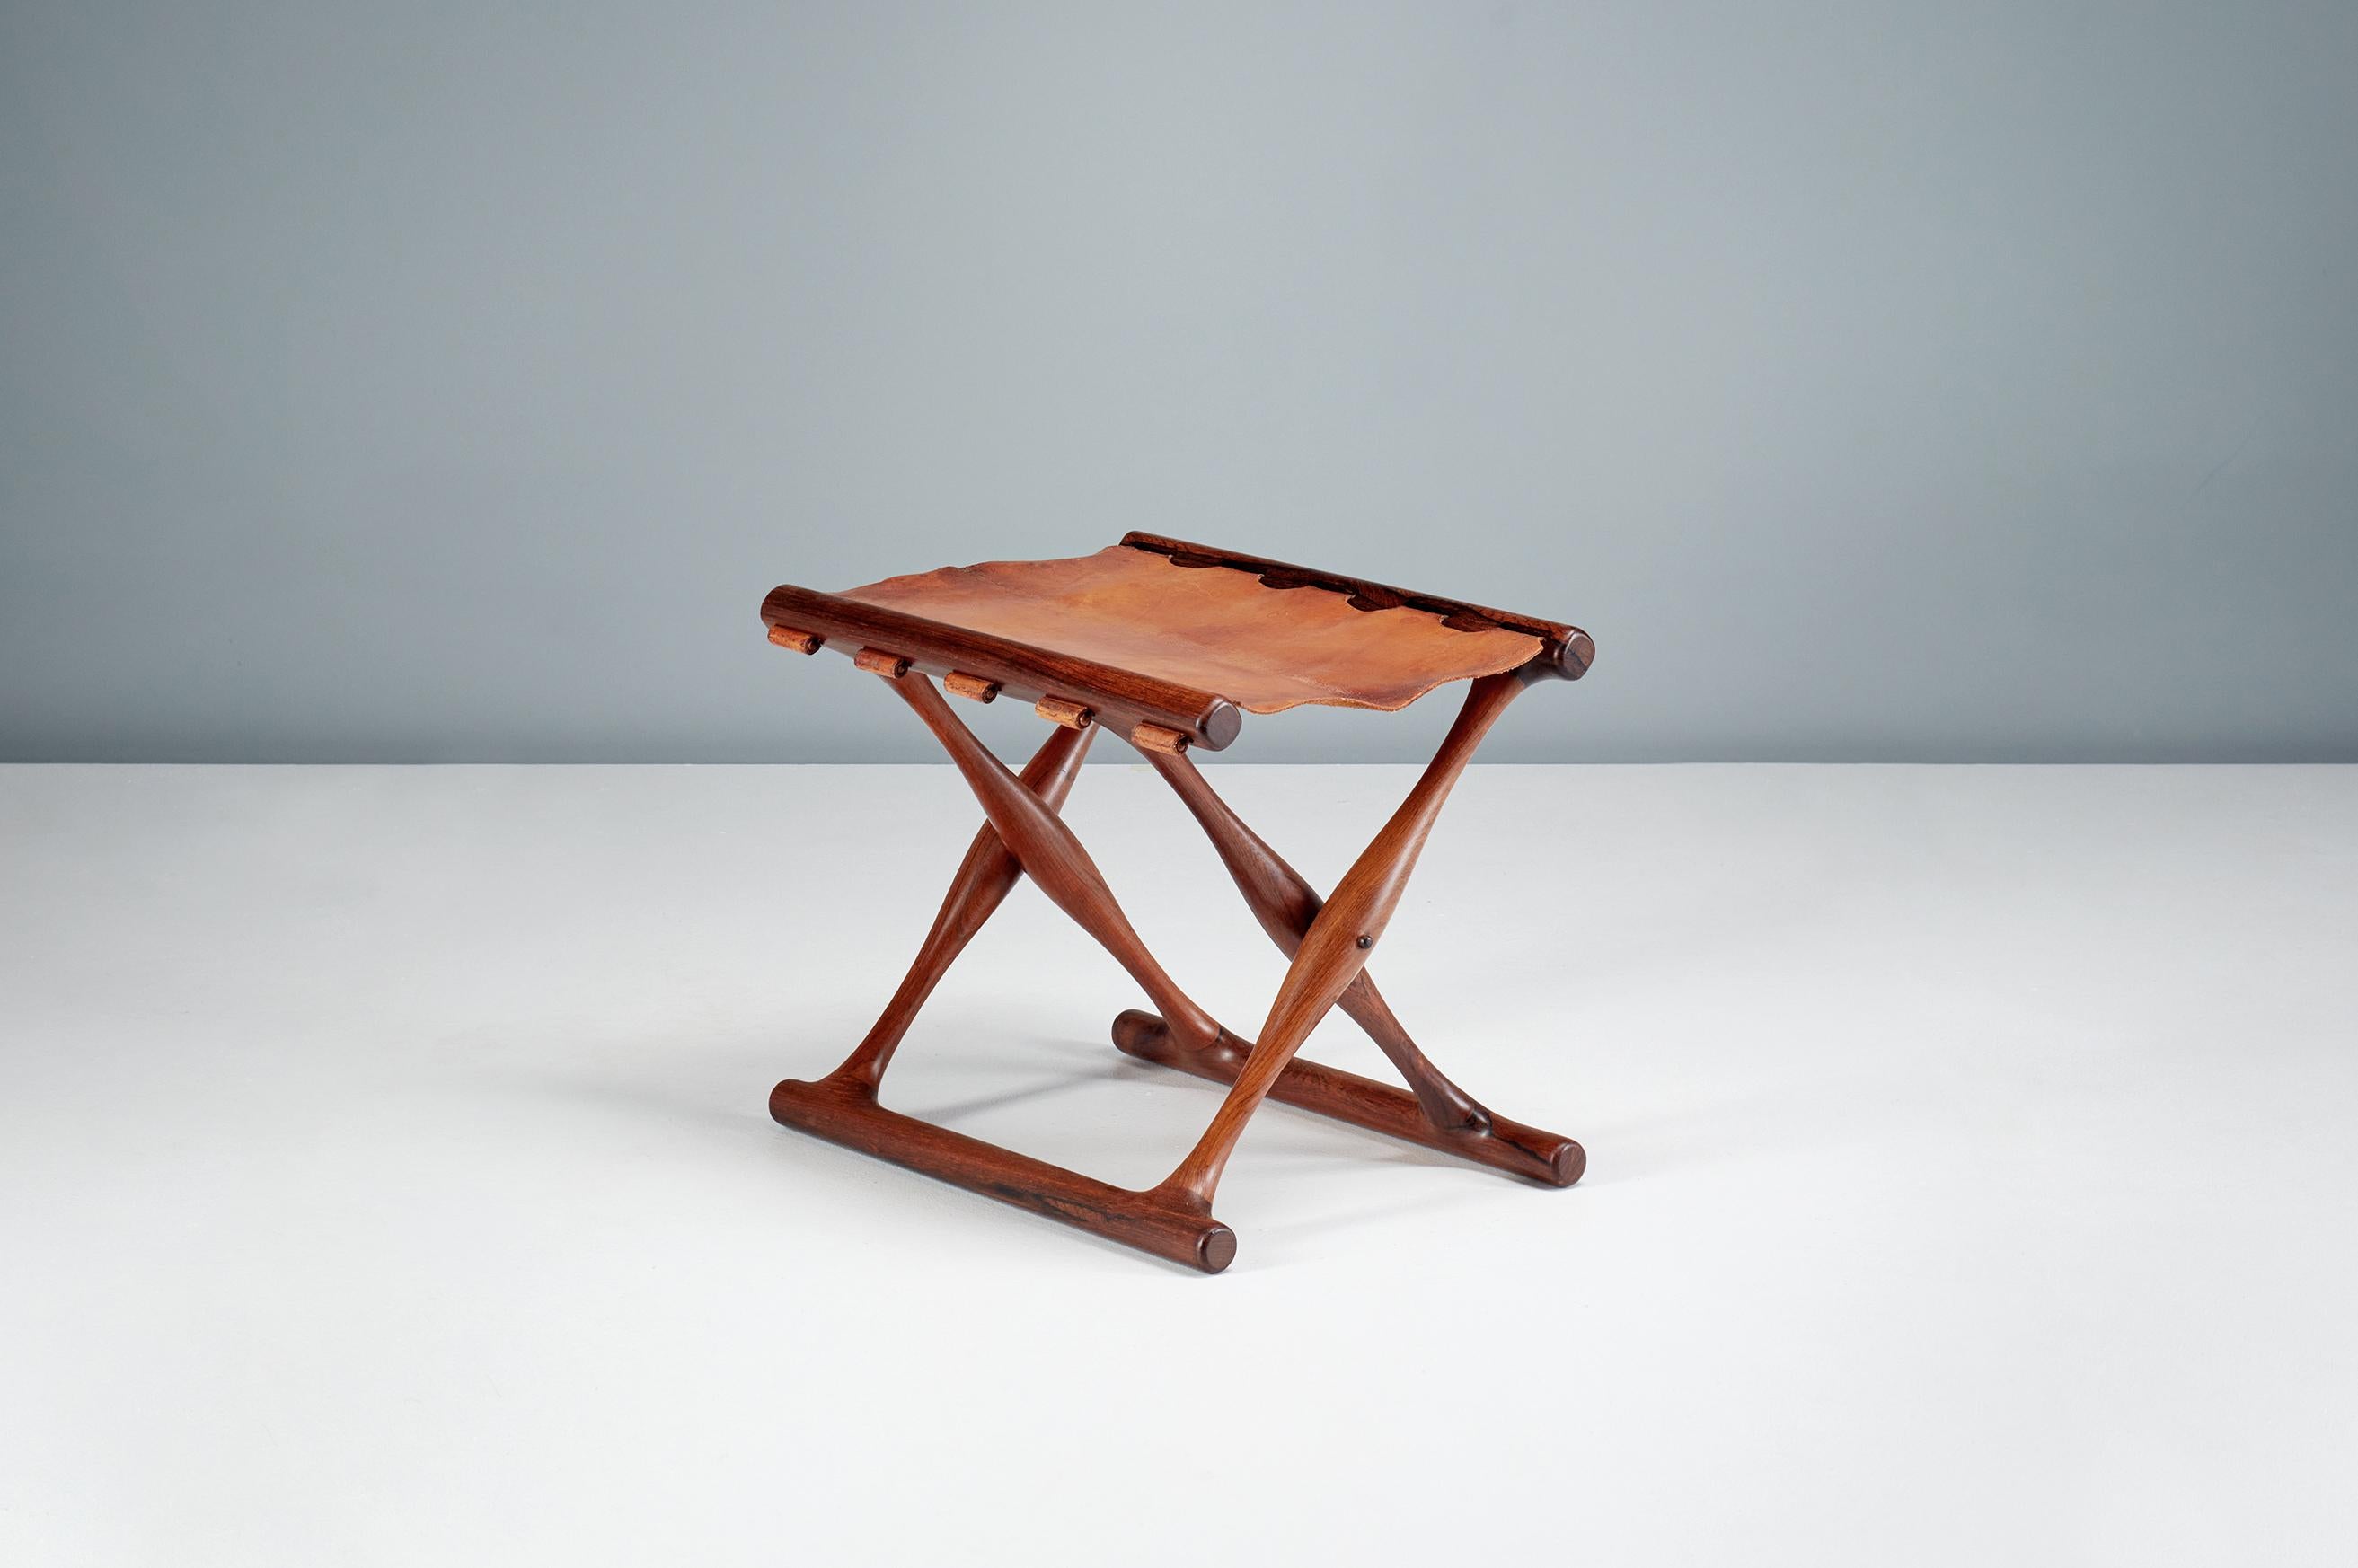 Poul Hundevad - Guldhoj Folding Stool, 1948

The iconic model 41 folding stool in beautiful rosewood with original, patinated cognac brown saddle leather seat. The Guldhoj stool was designed as a replica of a Bronze Age artefact found in Vamdrup,